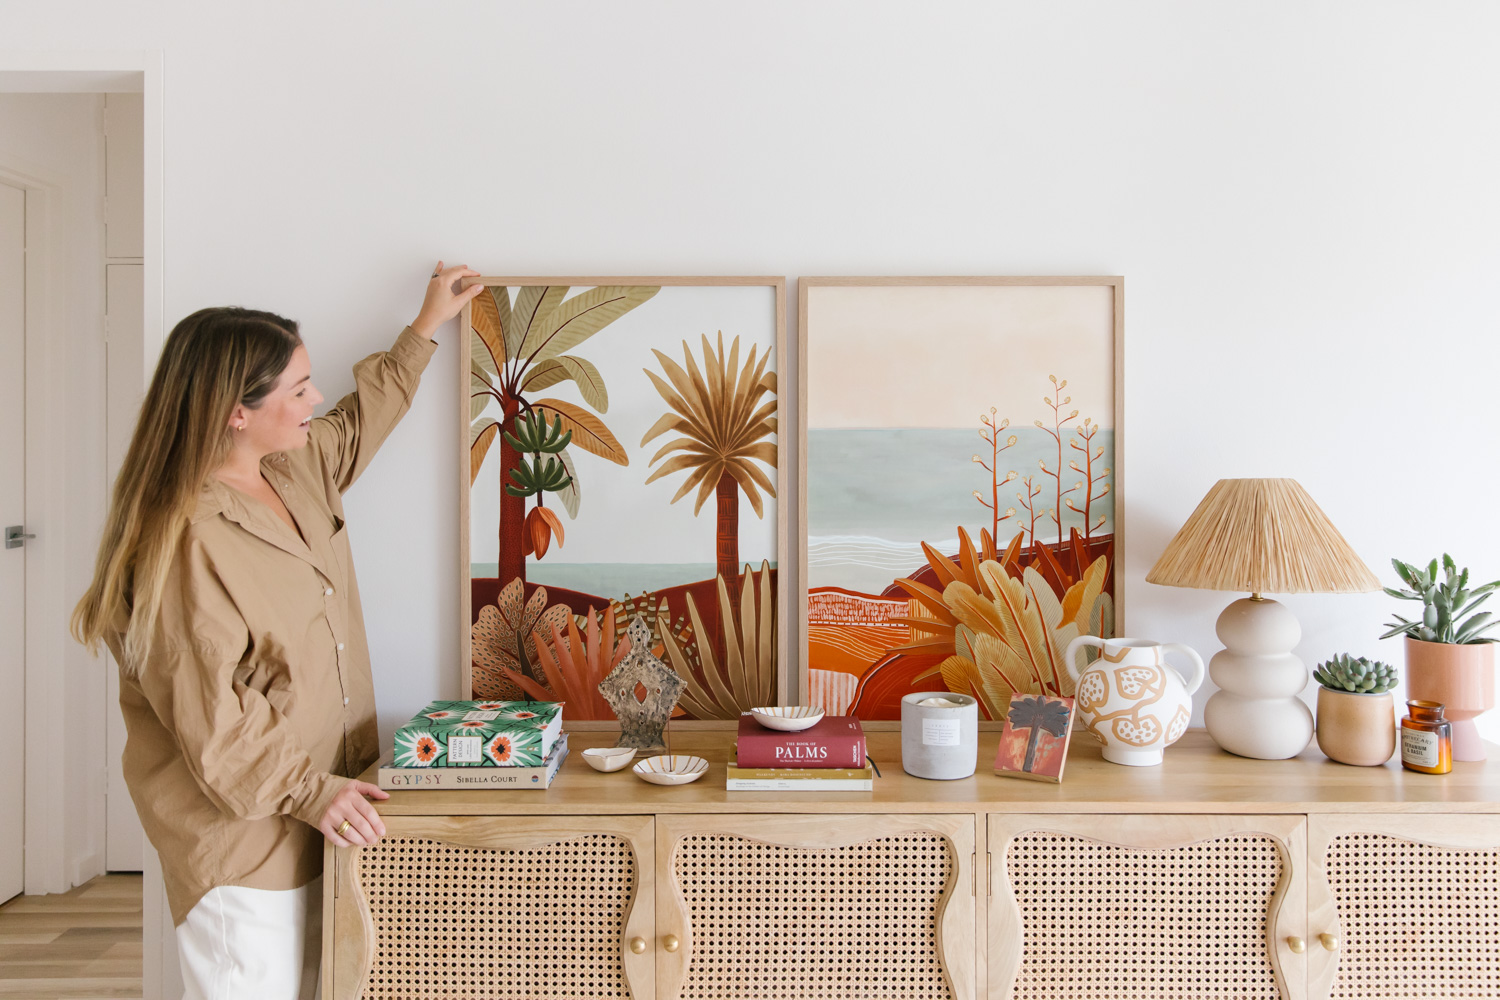 Framed fine art prints by artist Karina Jambrak styled on a wooden buffet, photo by Samee Lapham